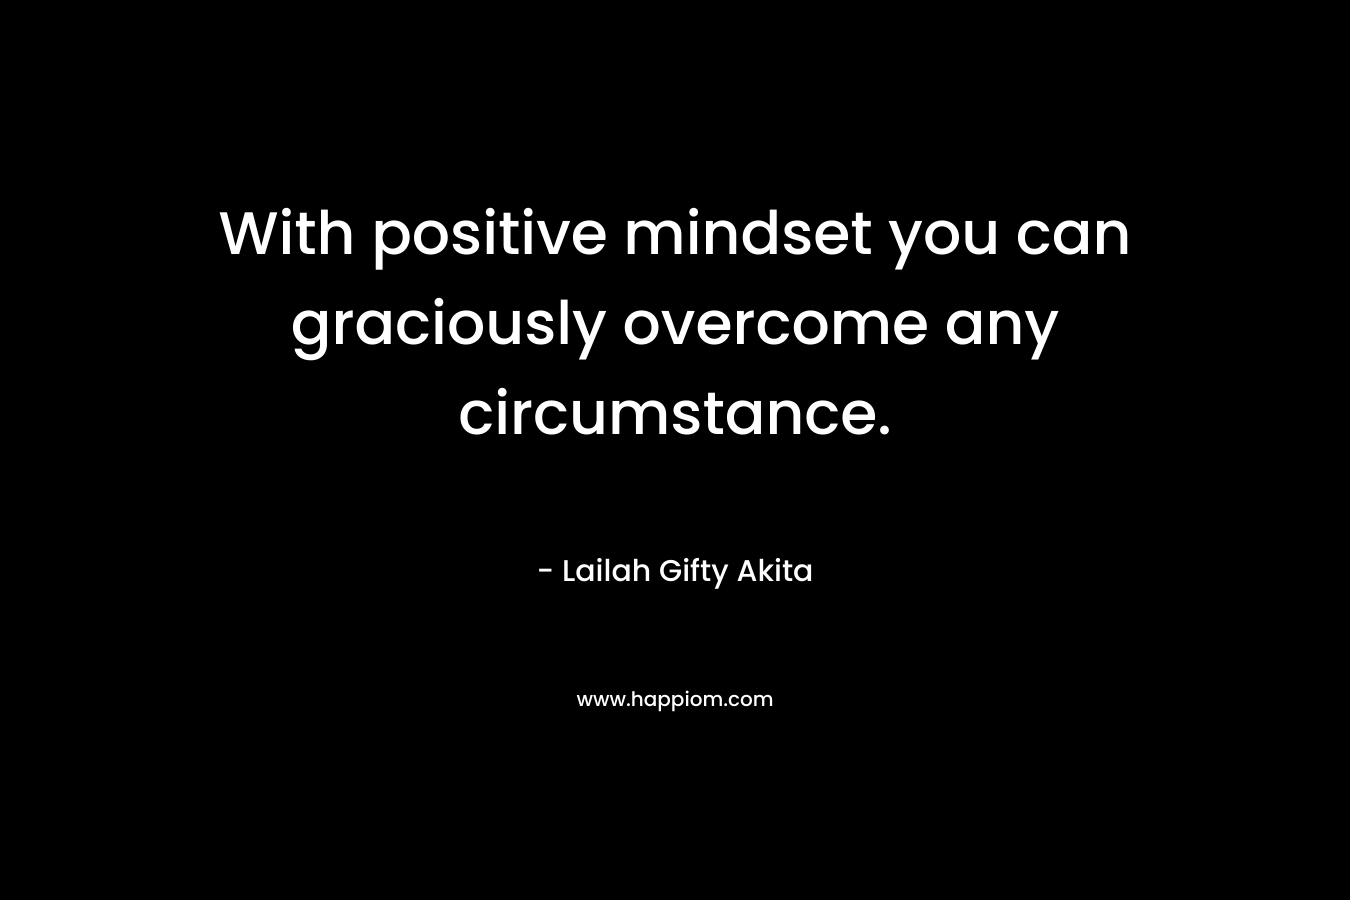 With positive mindset you can graciously overcome any circumstance.